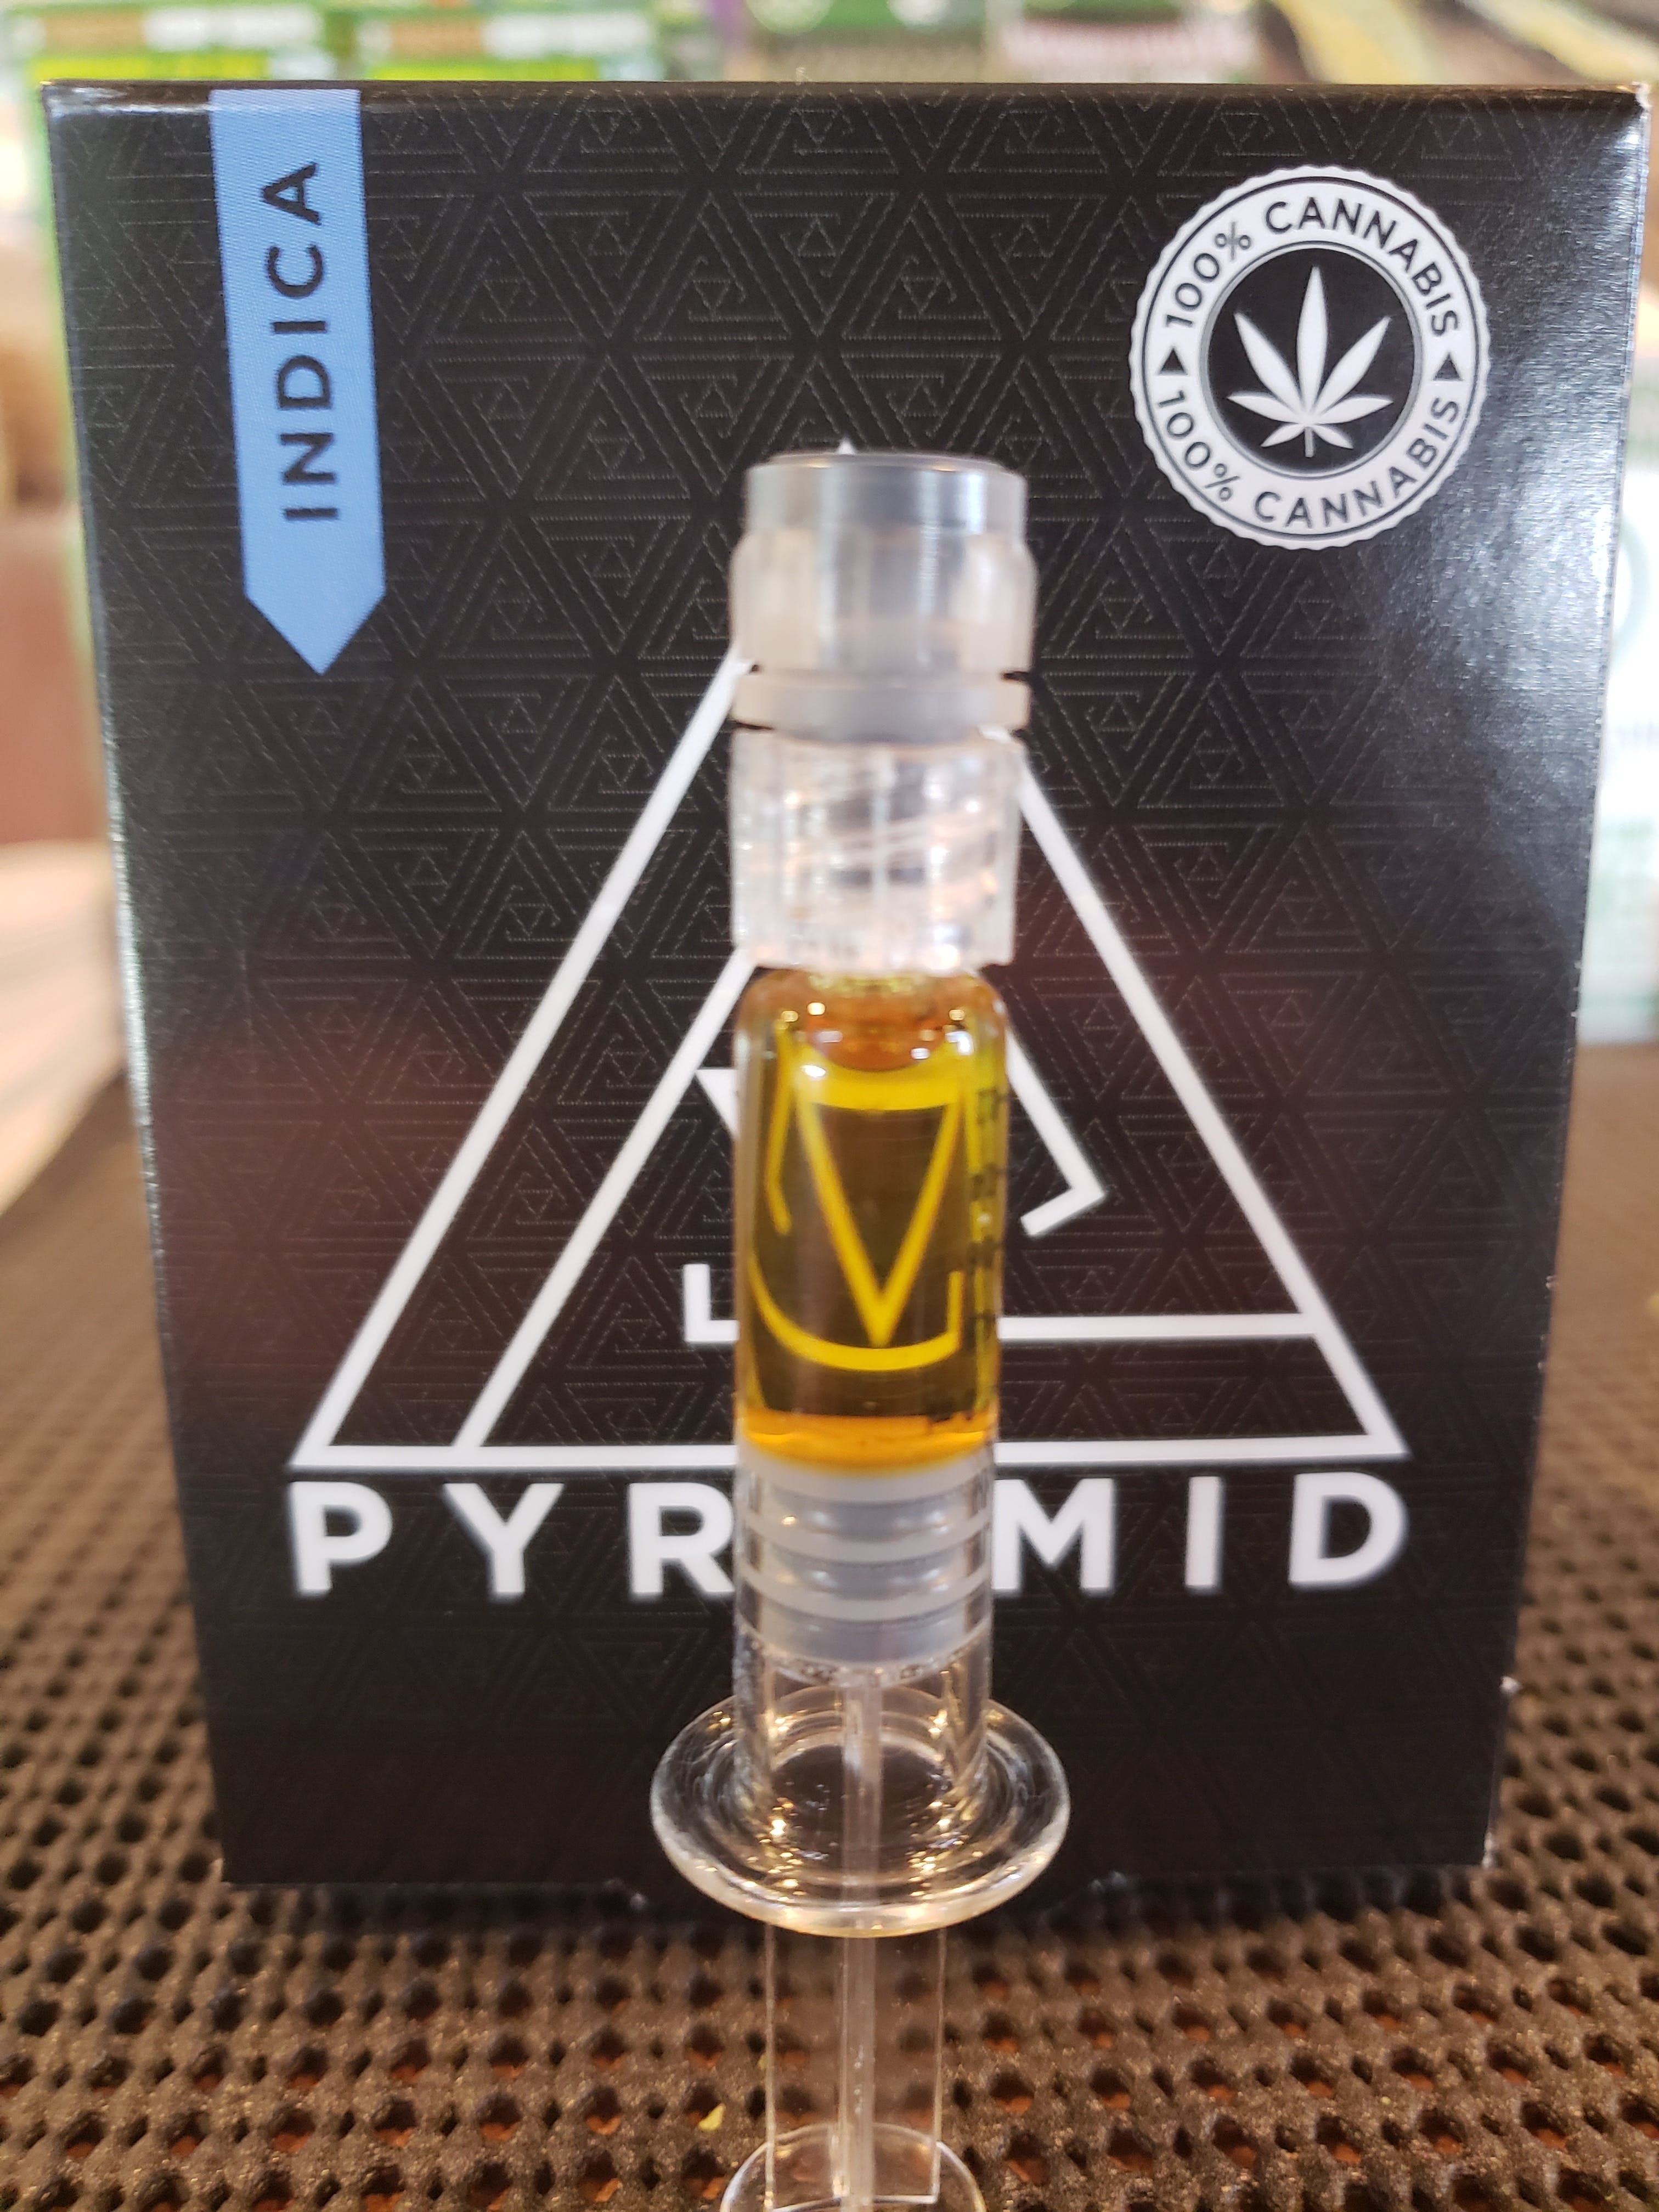 concentrate-pyramid-prism-distillate-syringe-indica-1000mg